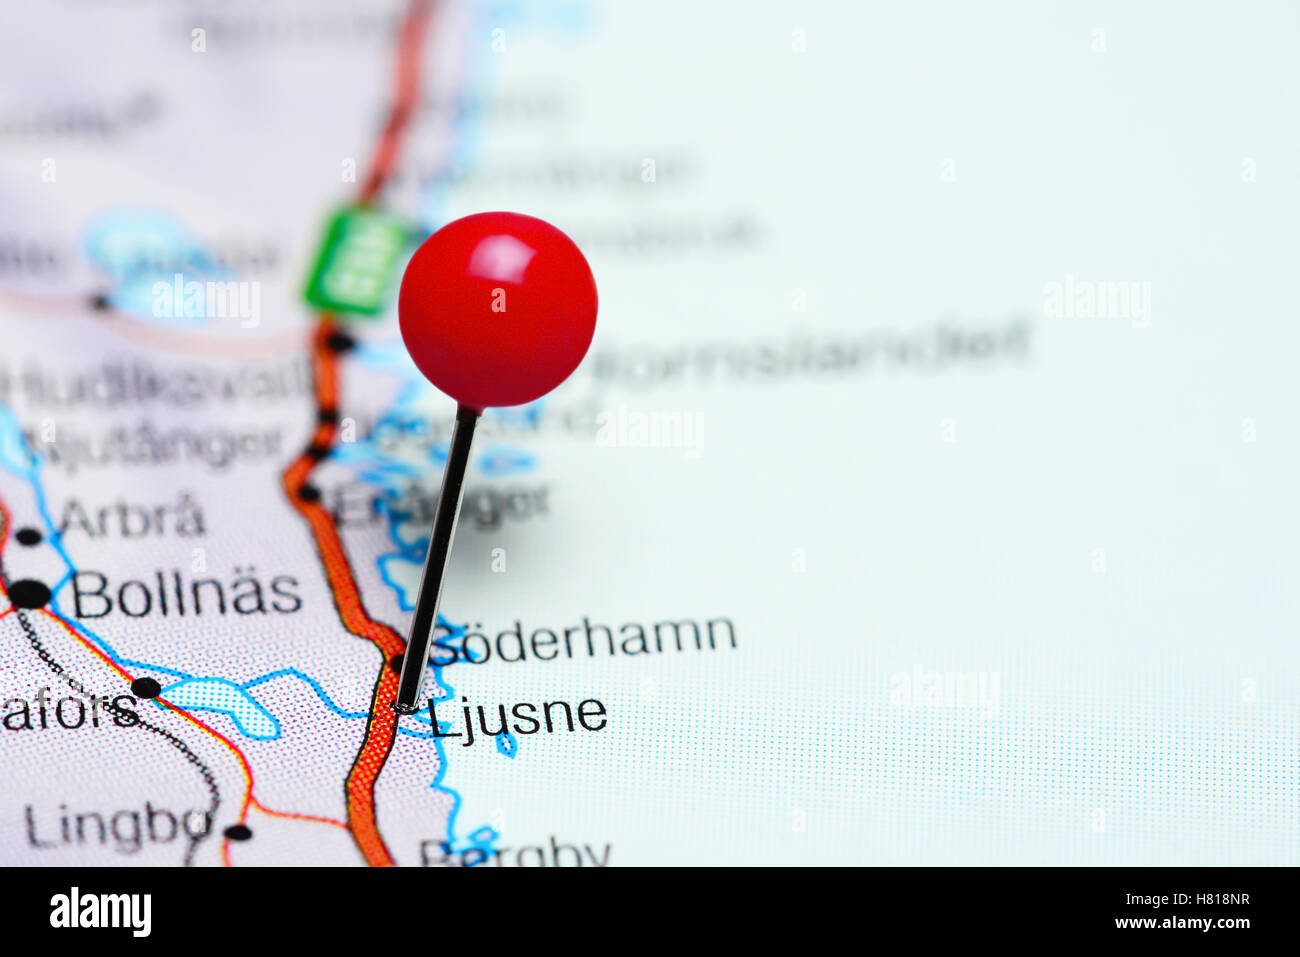 Ljusne pinned on a map of Sweden Stock Photo